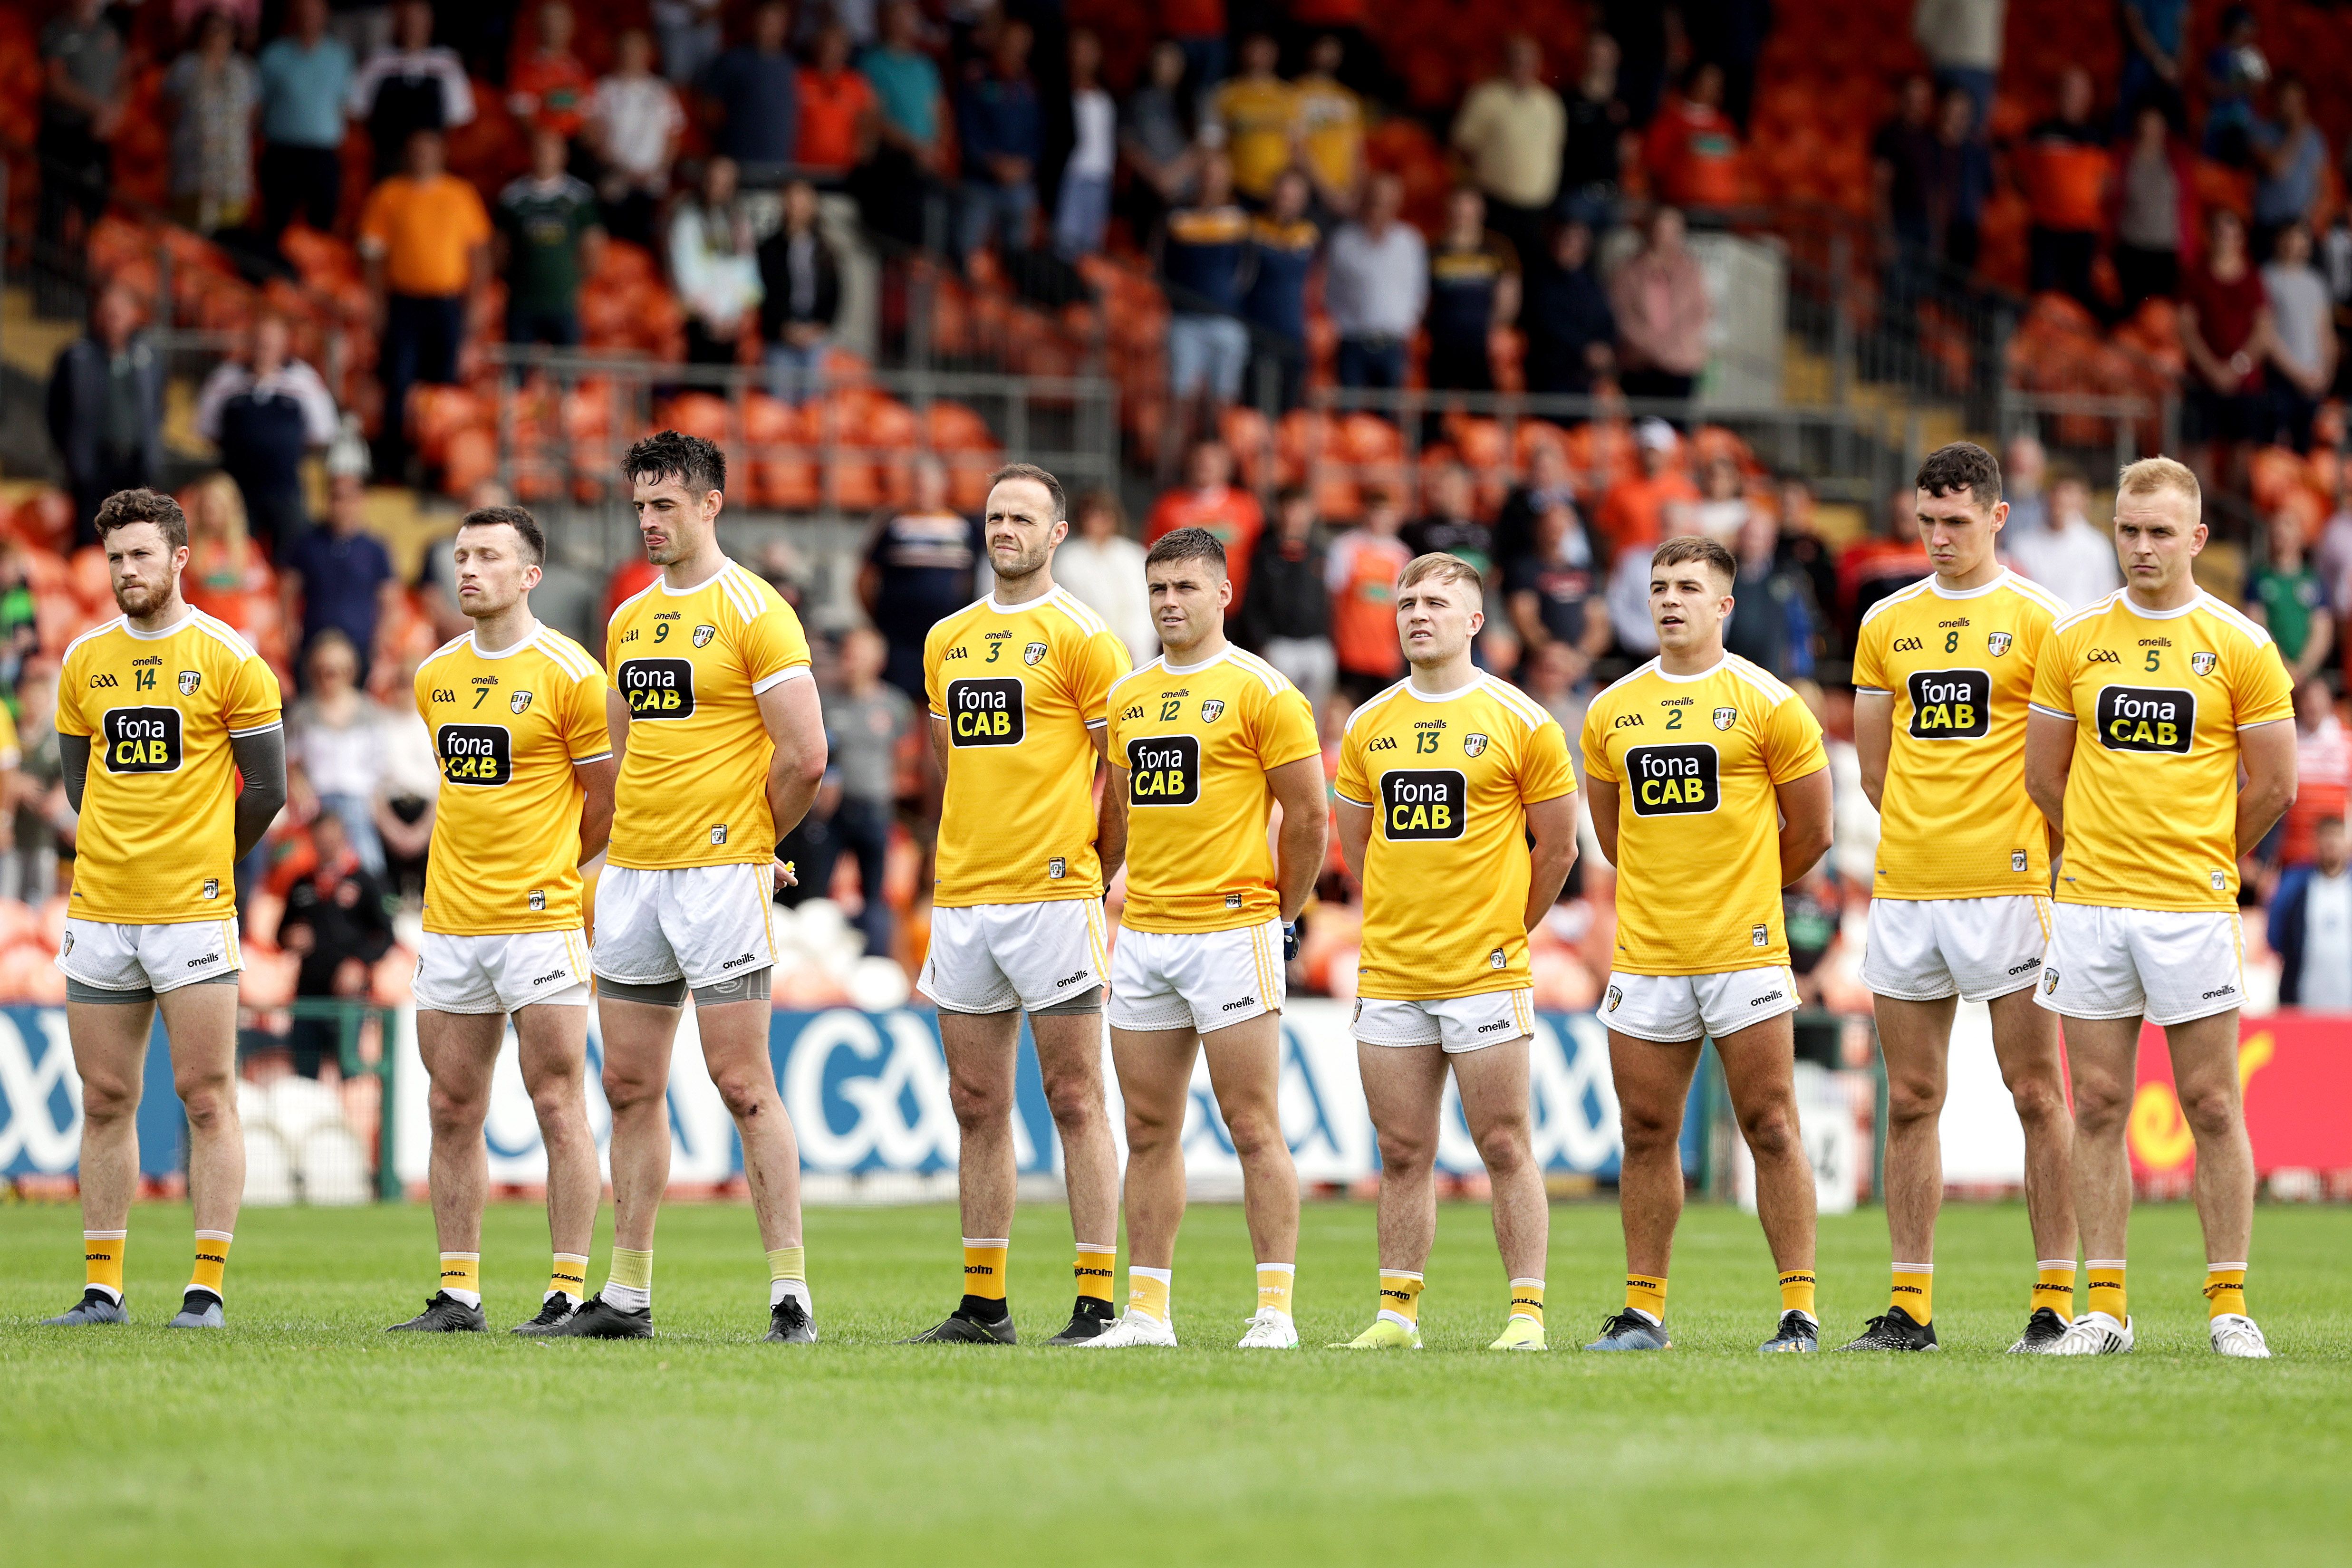 Antrim\'s footballers will be back in action early in 2022